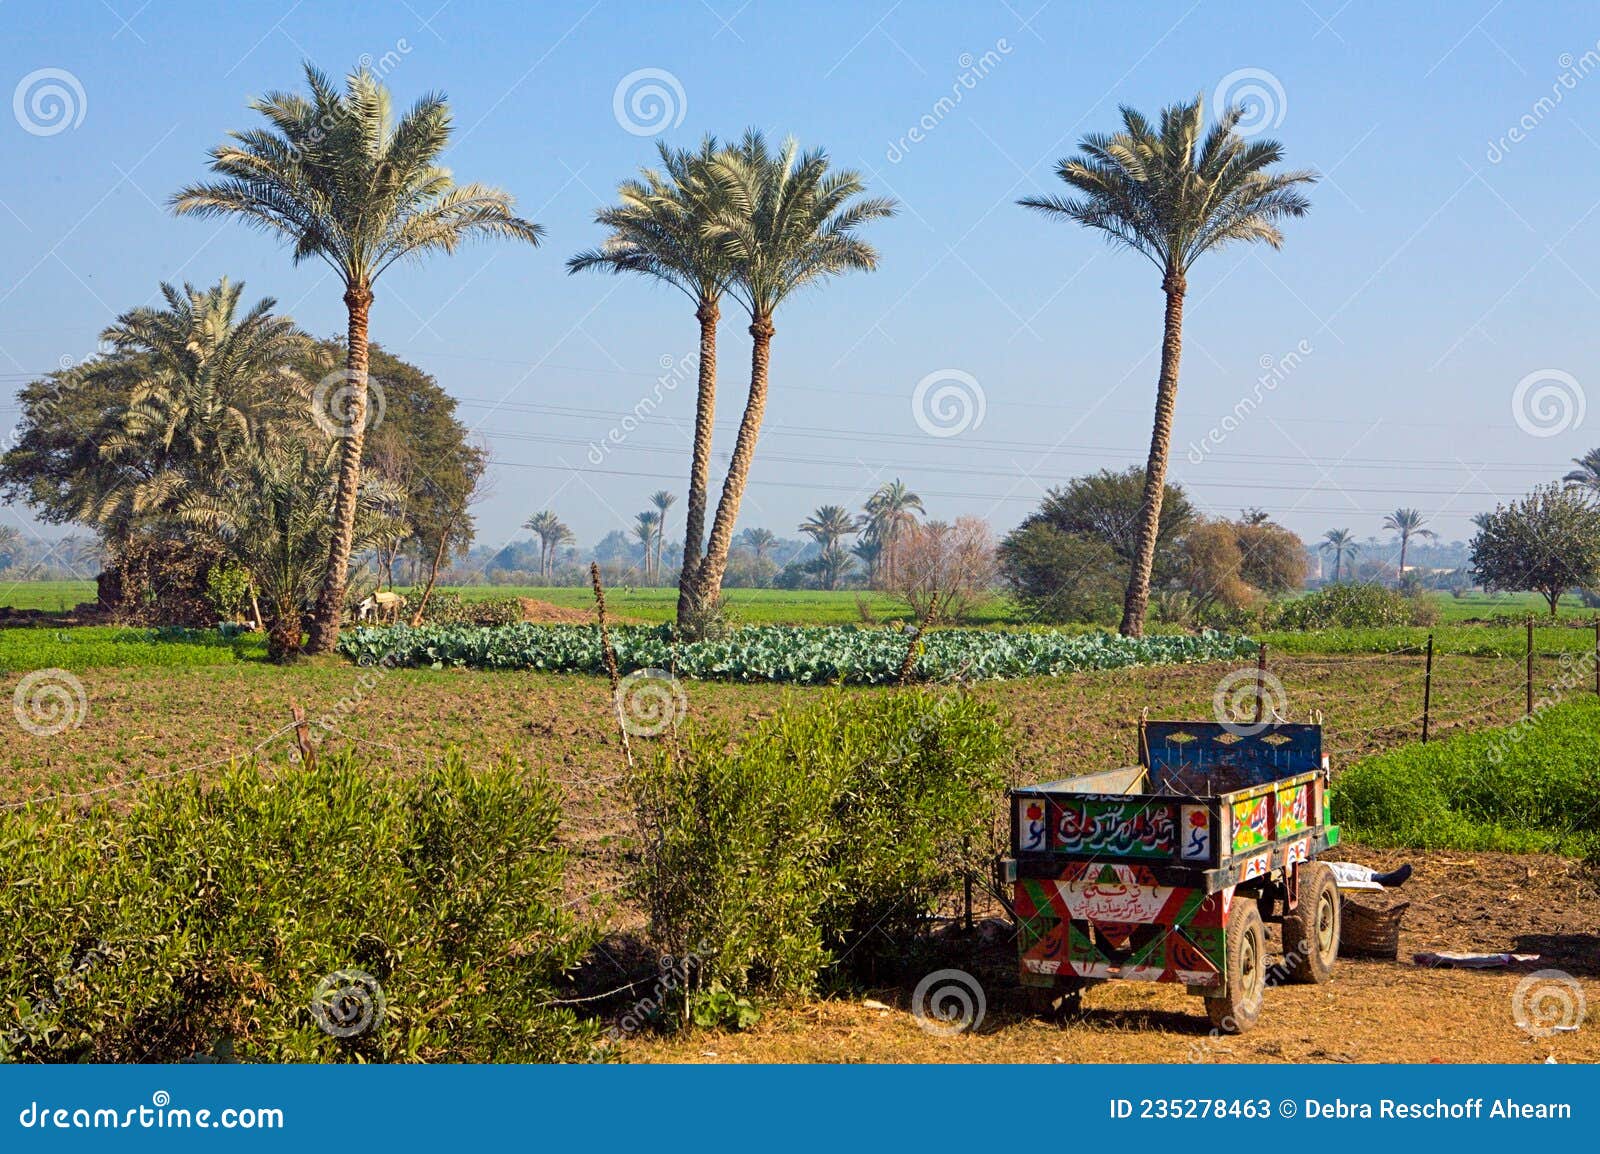 Three Palm Trees in the Egyptian Countryside Editorial Stock Photo ...